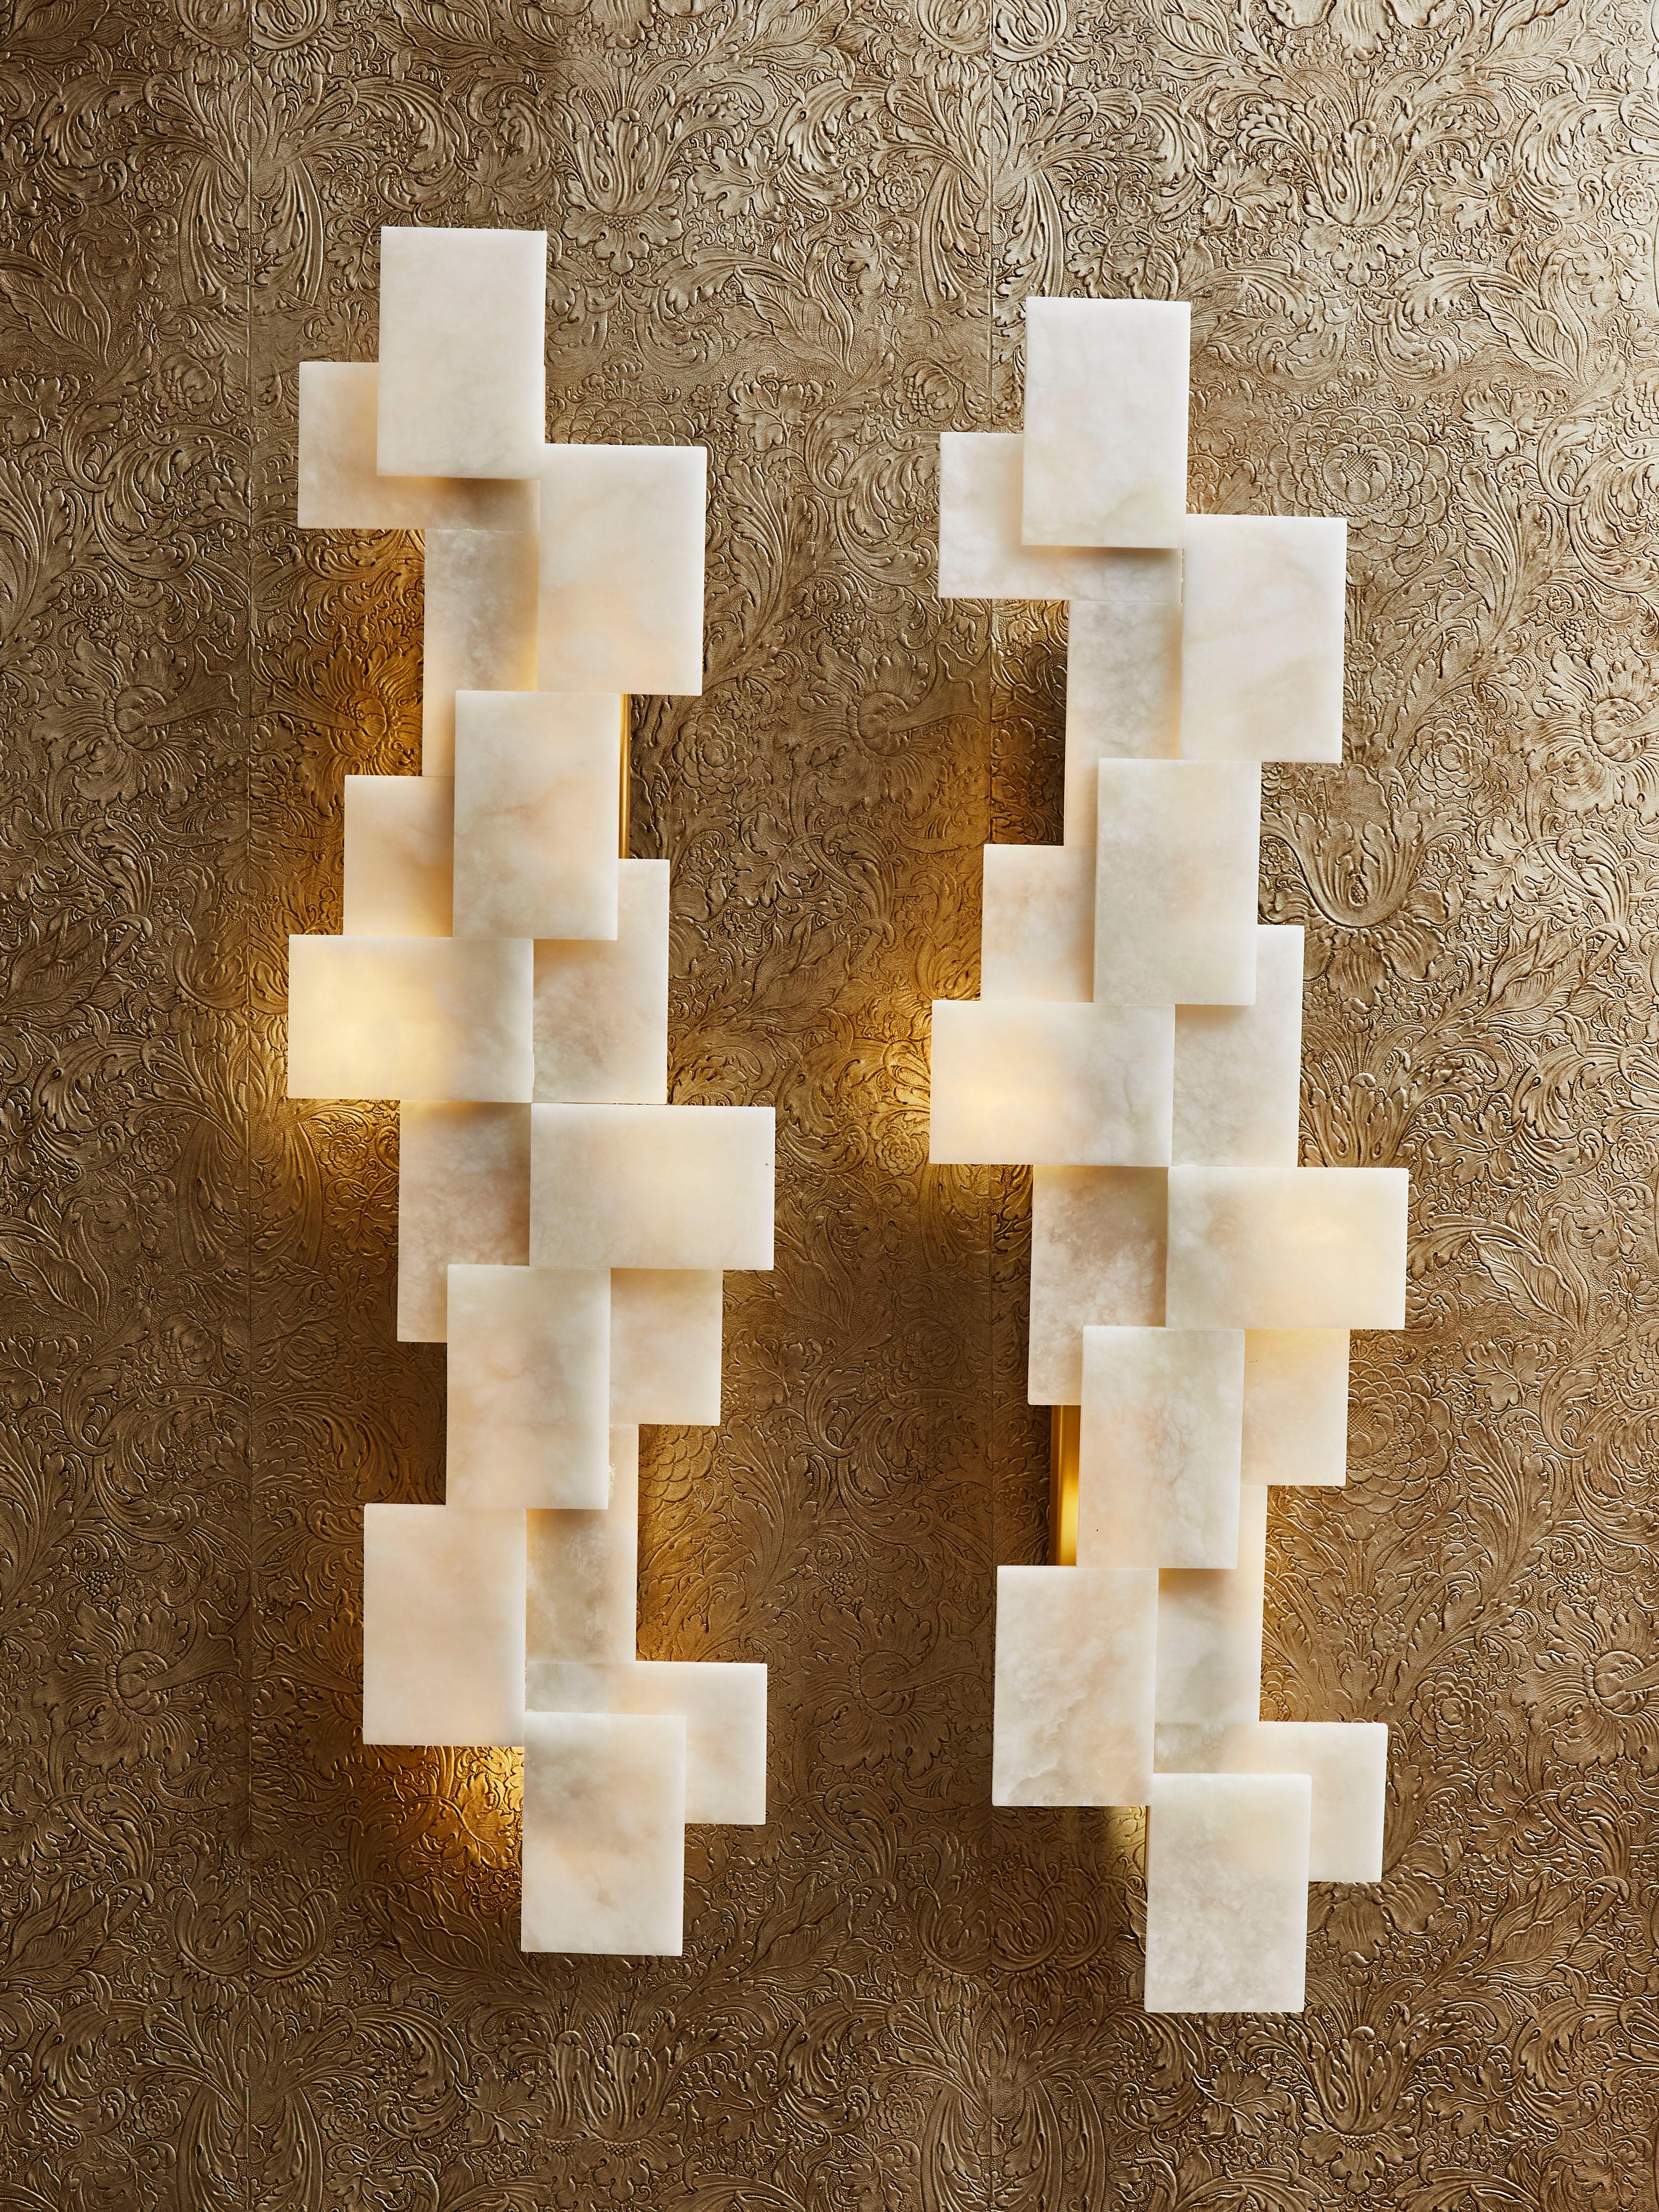 Stunning cubic wall sconces in enlightened alabaster and brass structure.
Different stone, finishes and dimensions can be ordered.
Creation by Studio Glustin.
France, 2020.